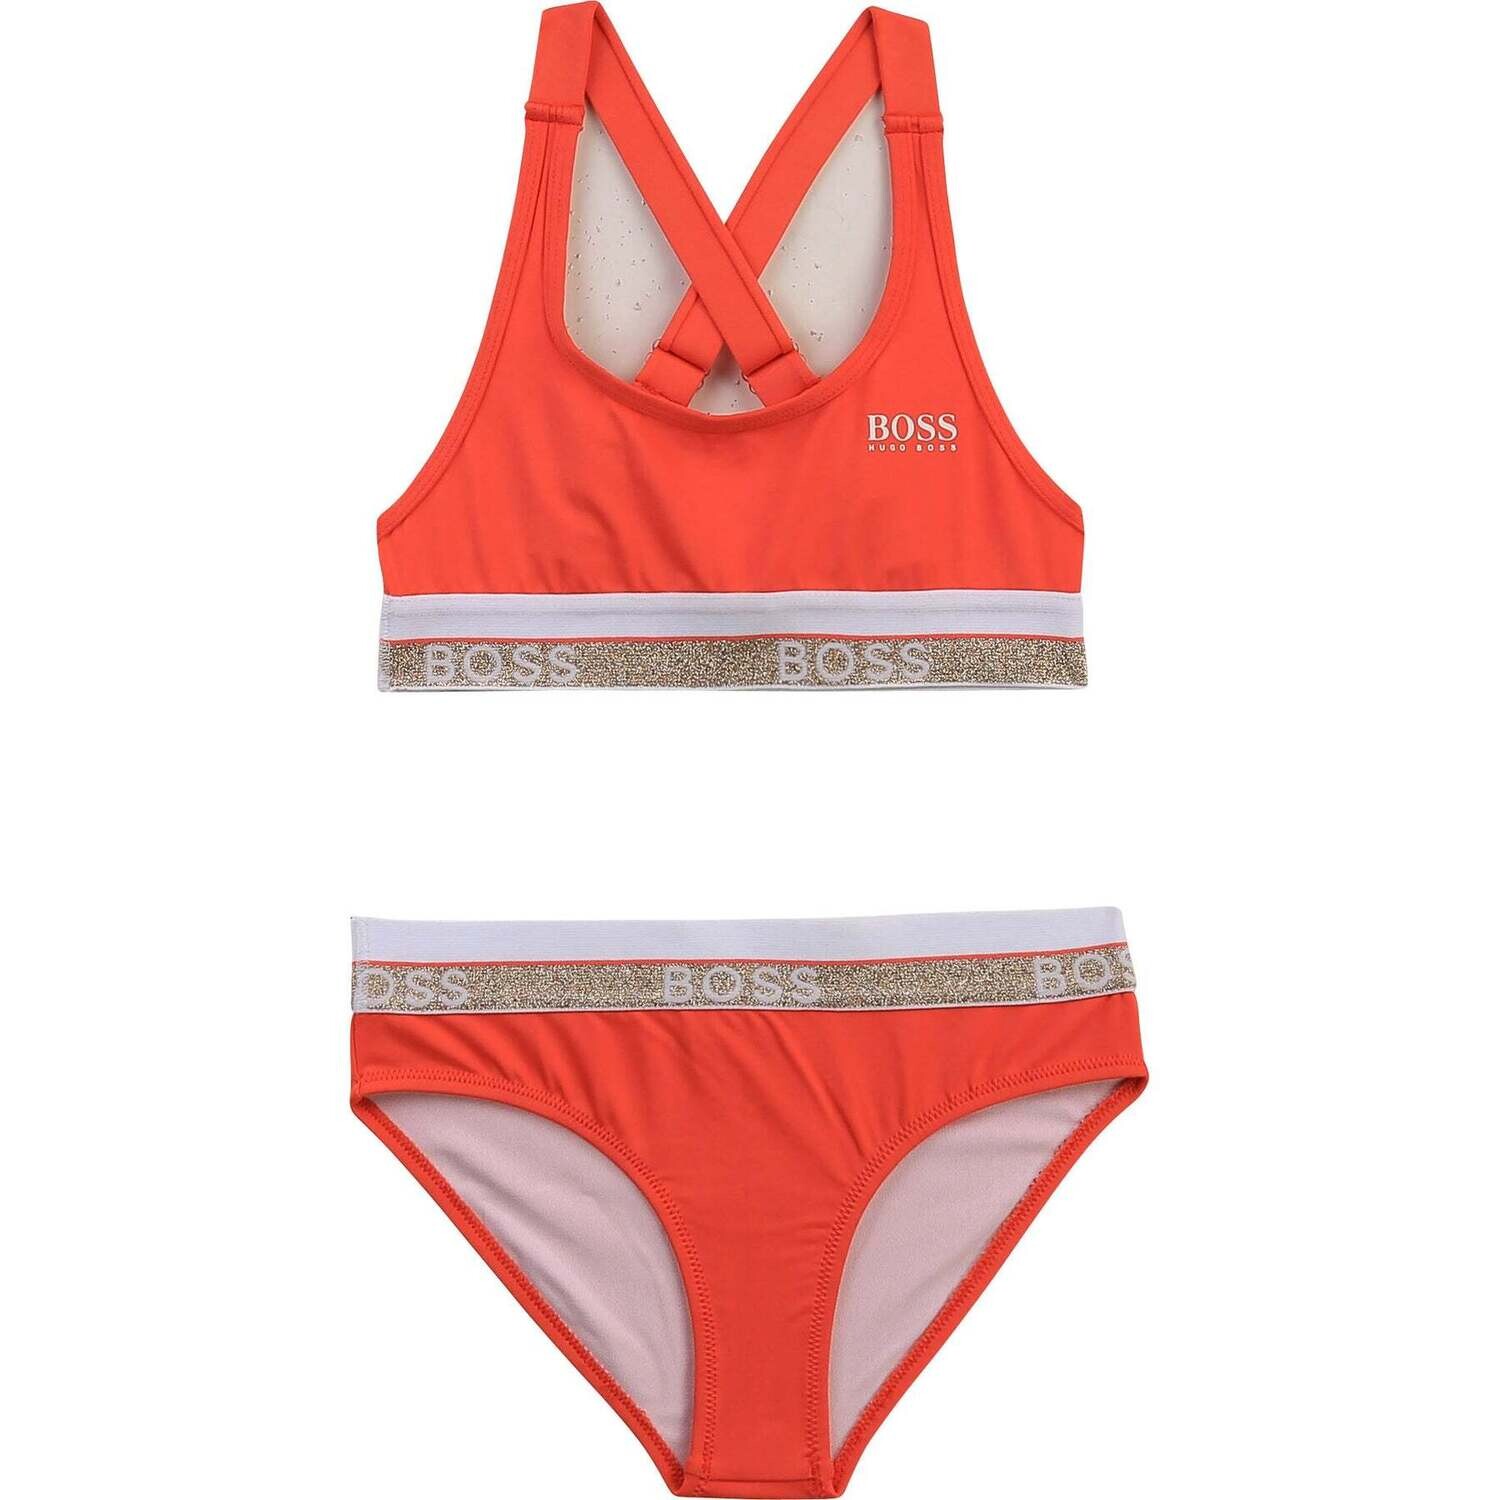 Hugo Boss two piece Coral bathing suit with a gold and white stripe size 6  J10116/402